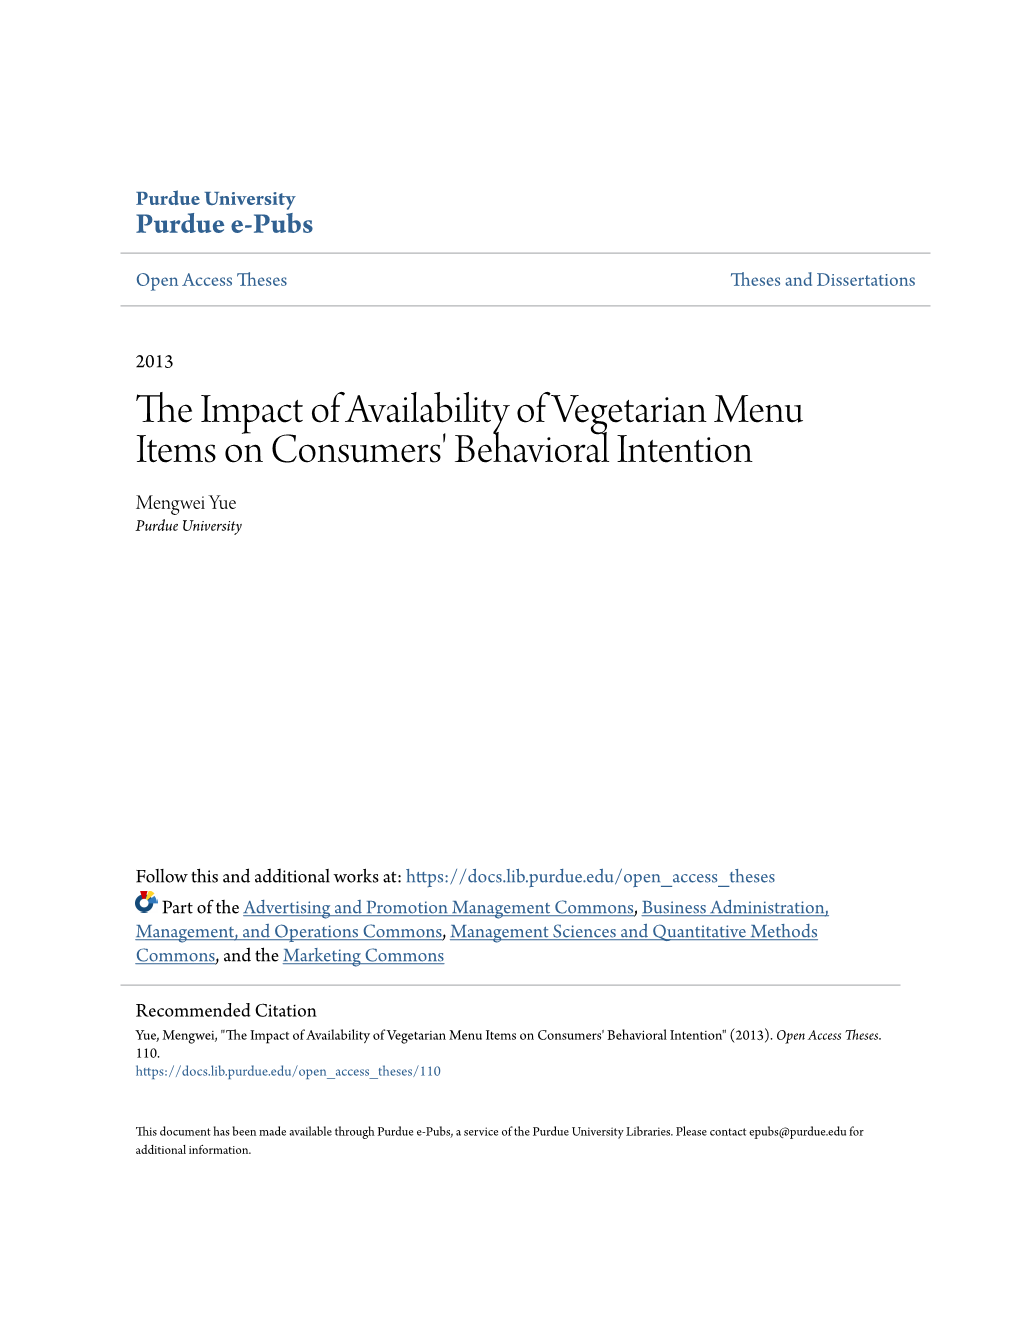 The Impact of Availability of Vegetarian Menu Items on Consumers' Behavioral Intention